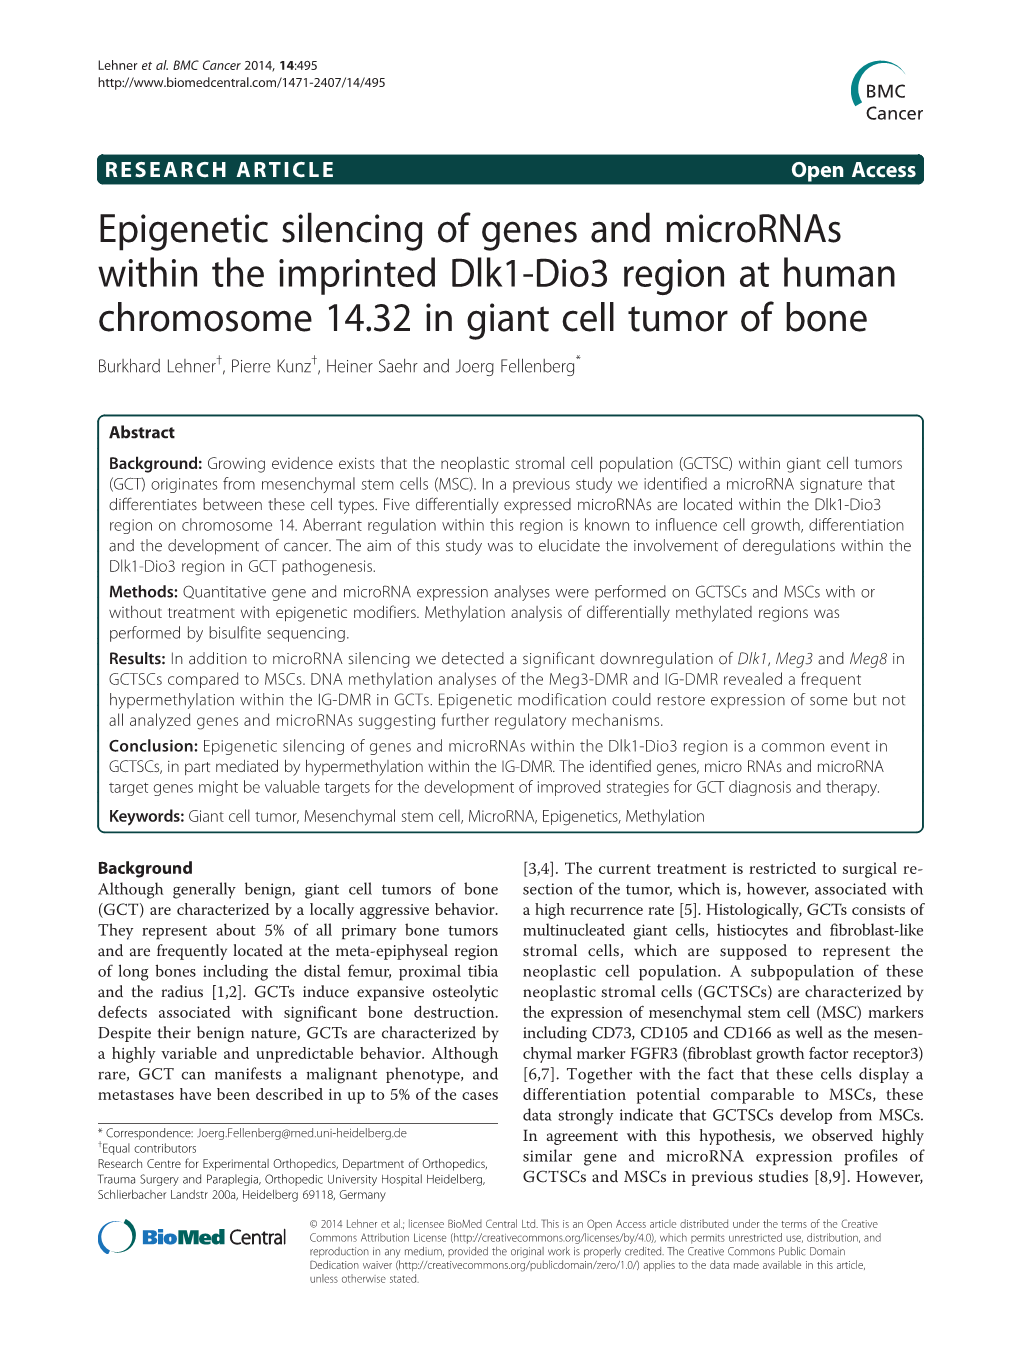 Epigenetic Silencing of Genes and Micrornas Within the Imprinted Dlk1-Dio3 Region at Human Chromosome 14.32 in Giant Cell Tumor